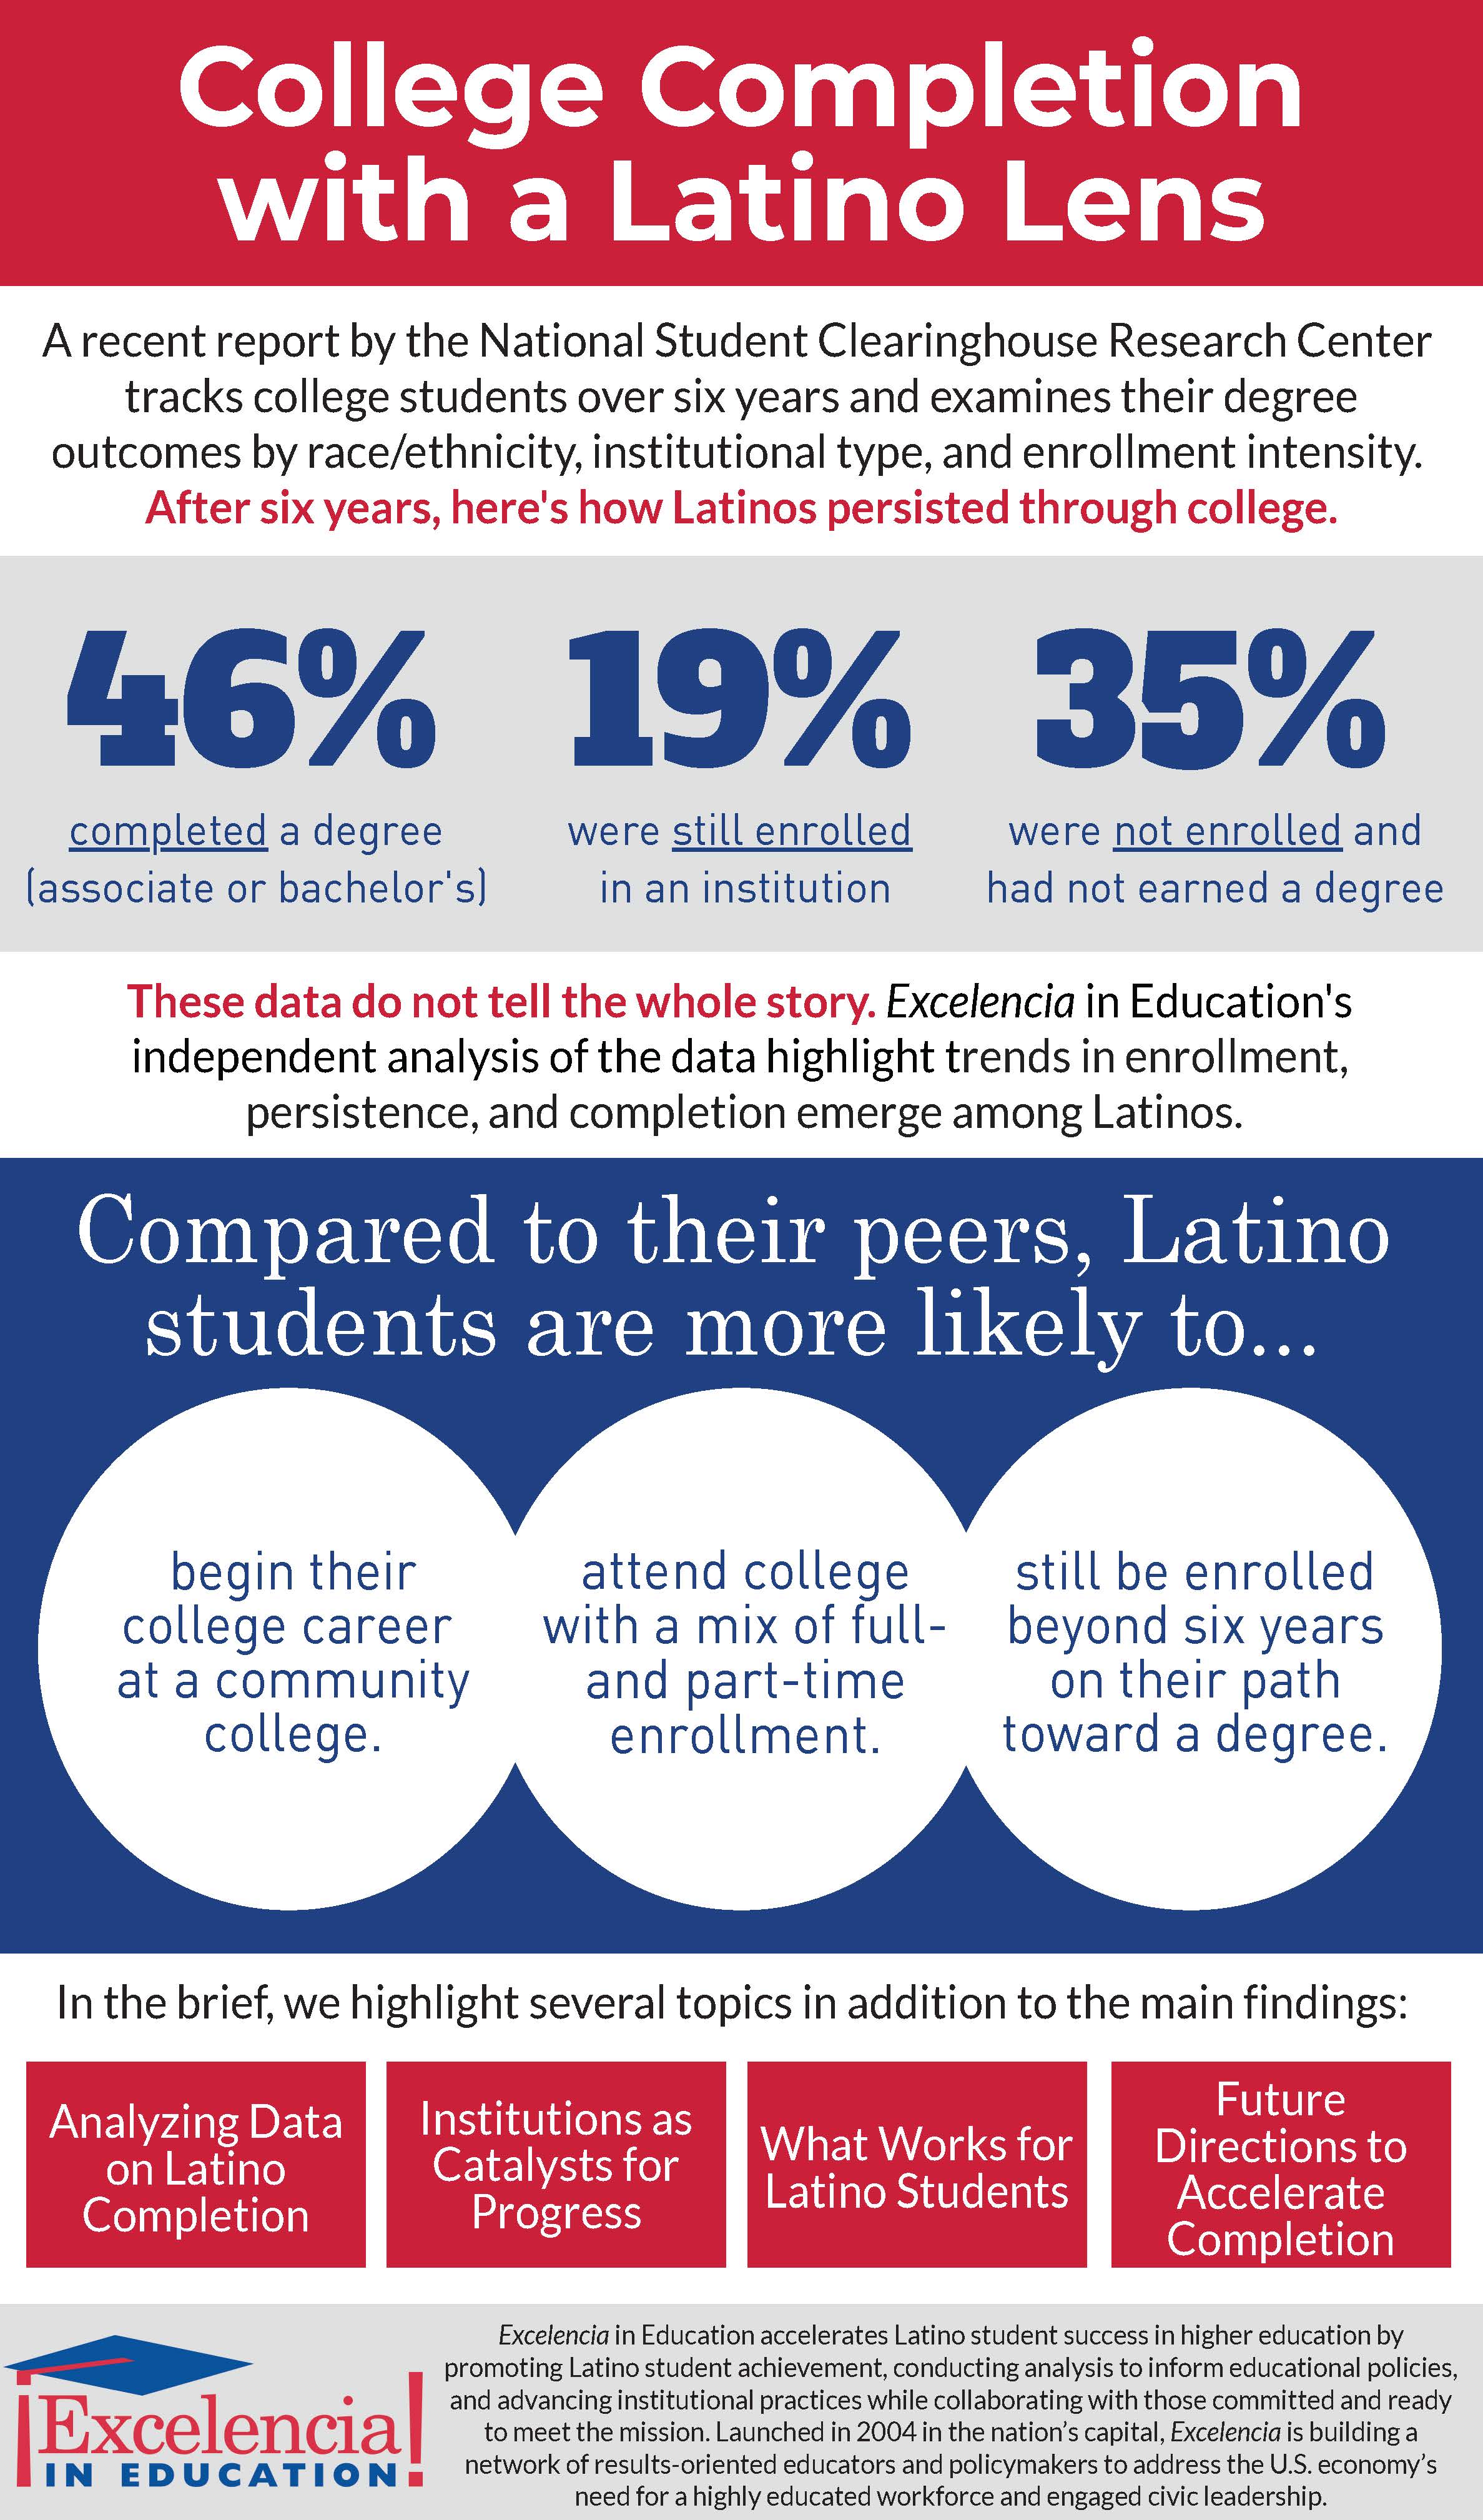 Infographic-CollegeCompletion-LatinoLens-Text graduate excelencia education